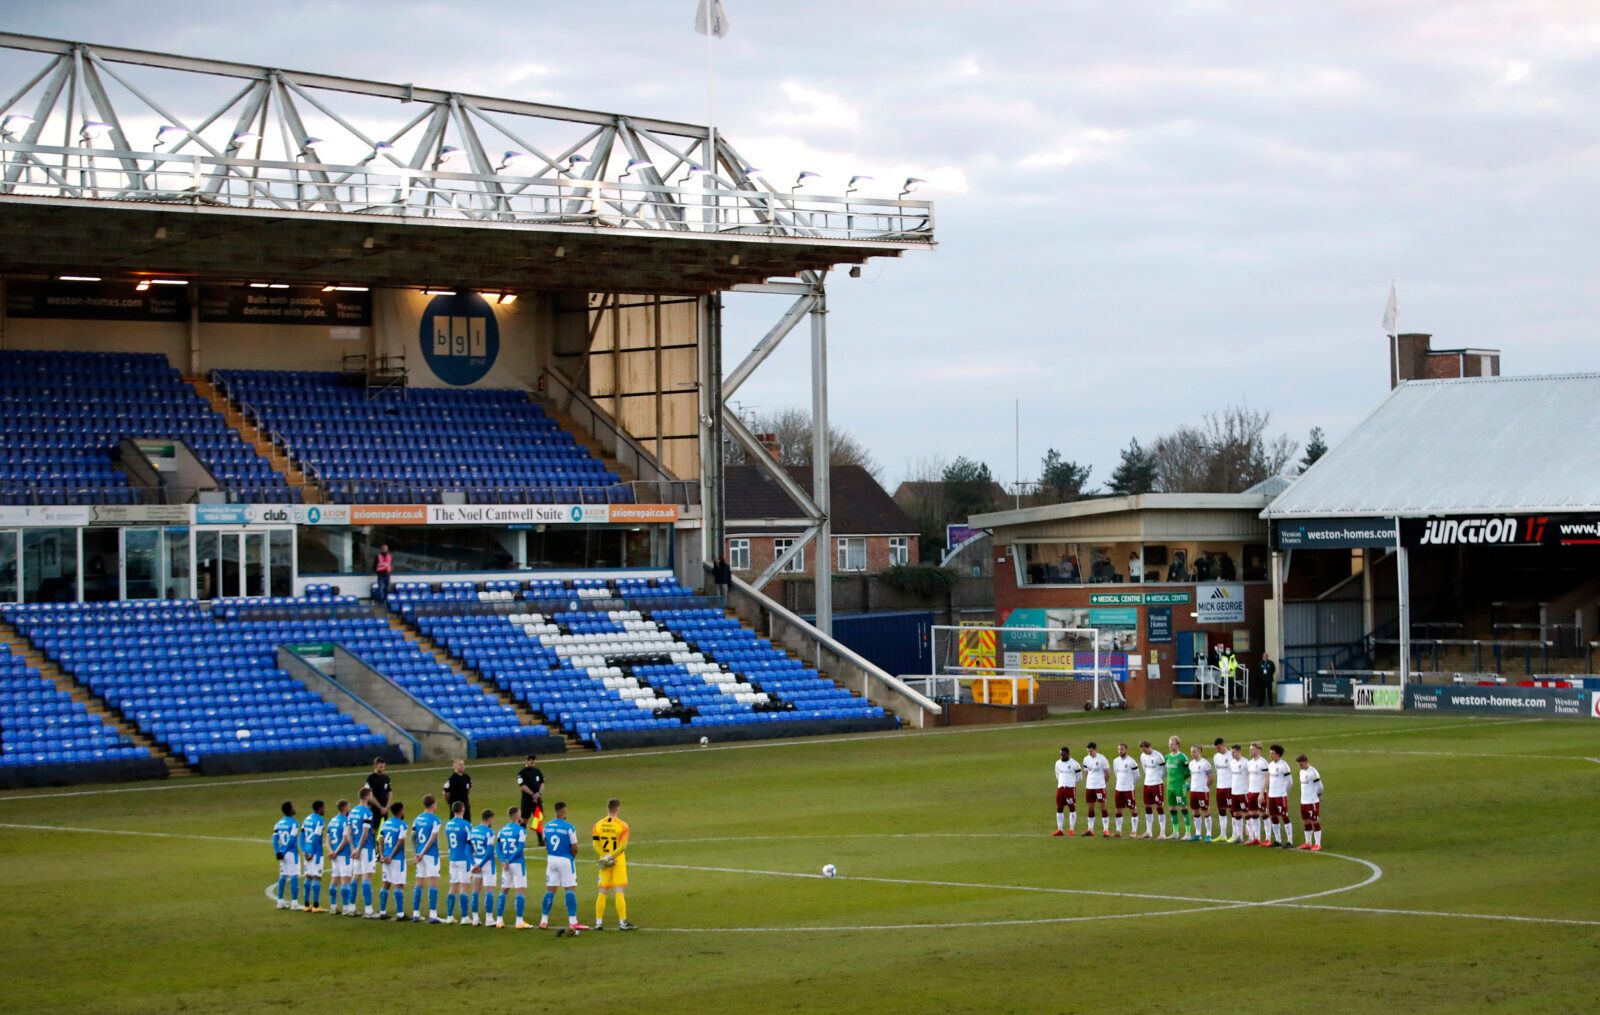 Soccer Football - League One - Peterborough United v Northampton Town - Weston Homes Stadium, Peterborough, Britain - April 16, 2021 General view of players during a two minute silence after Britain's Prince Philip, husband of Queen Elizabeth, died at the age of 99 Action Images via Reuters/Andrew Boyers EDITORIAL USE ONLY. No use with unauthorized audio, video, data, fixture lists, club/league logos or 'live' services. Online in-match use limited to 75 images, no video emulation. No use in bett